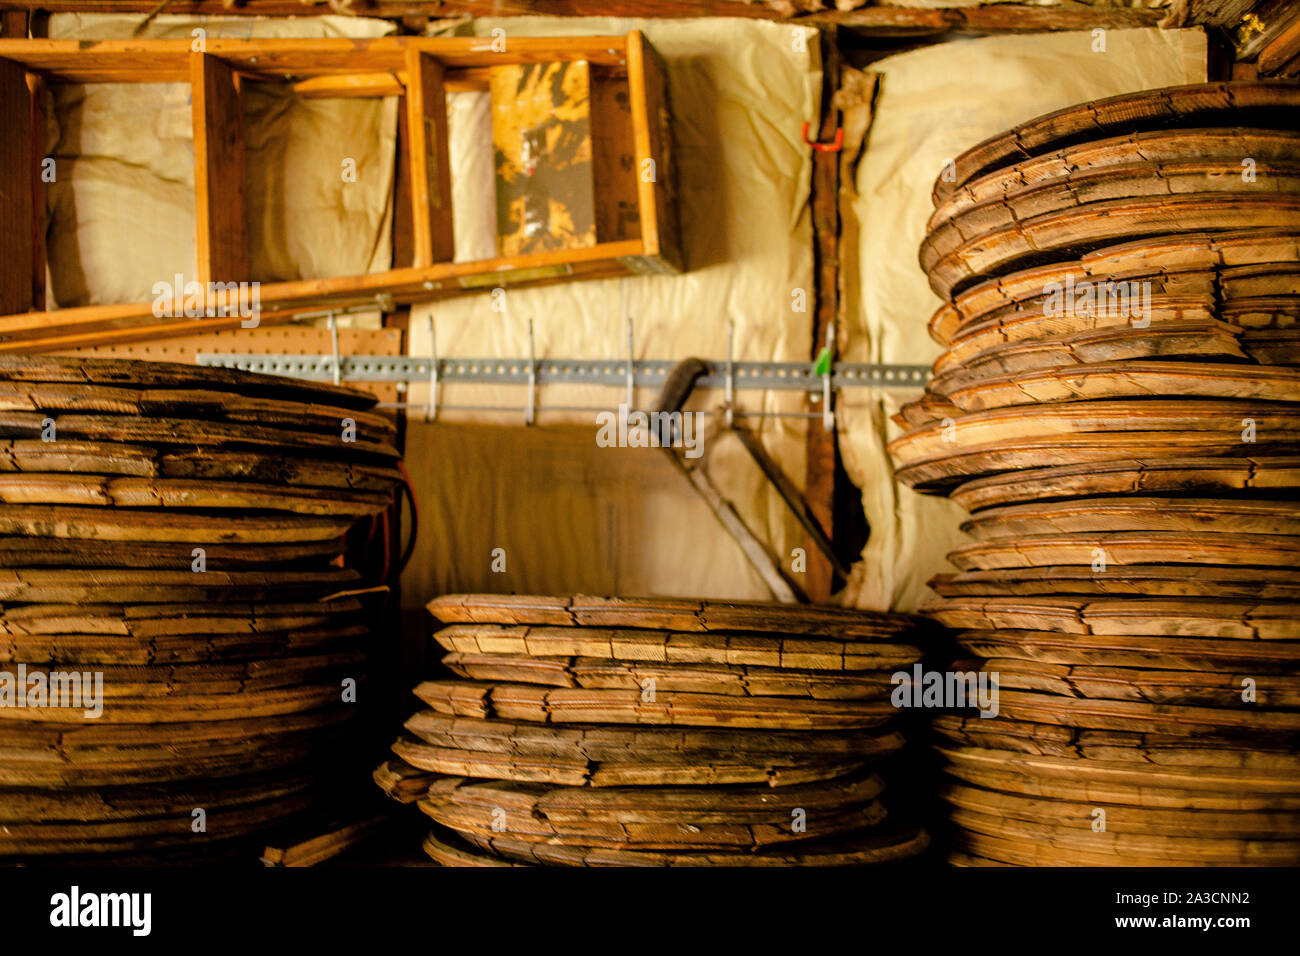 Stacks of wood bourbon barrel lids lean on  wall lined with tools Stock Photo